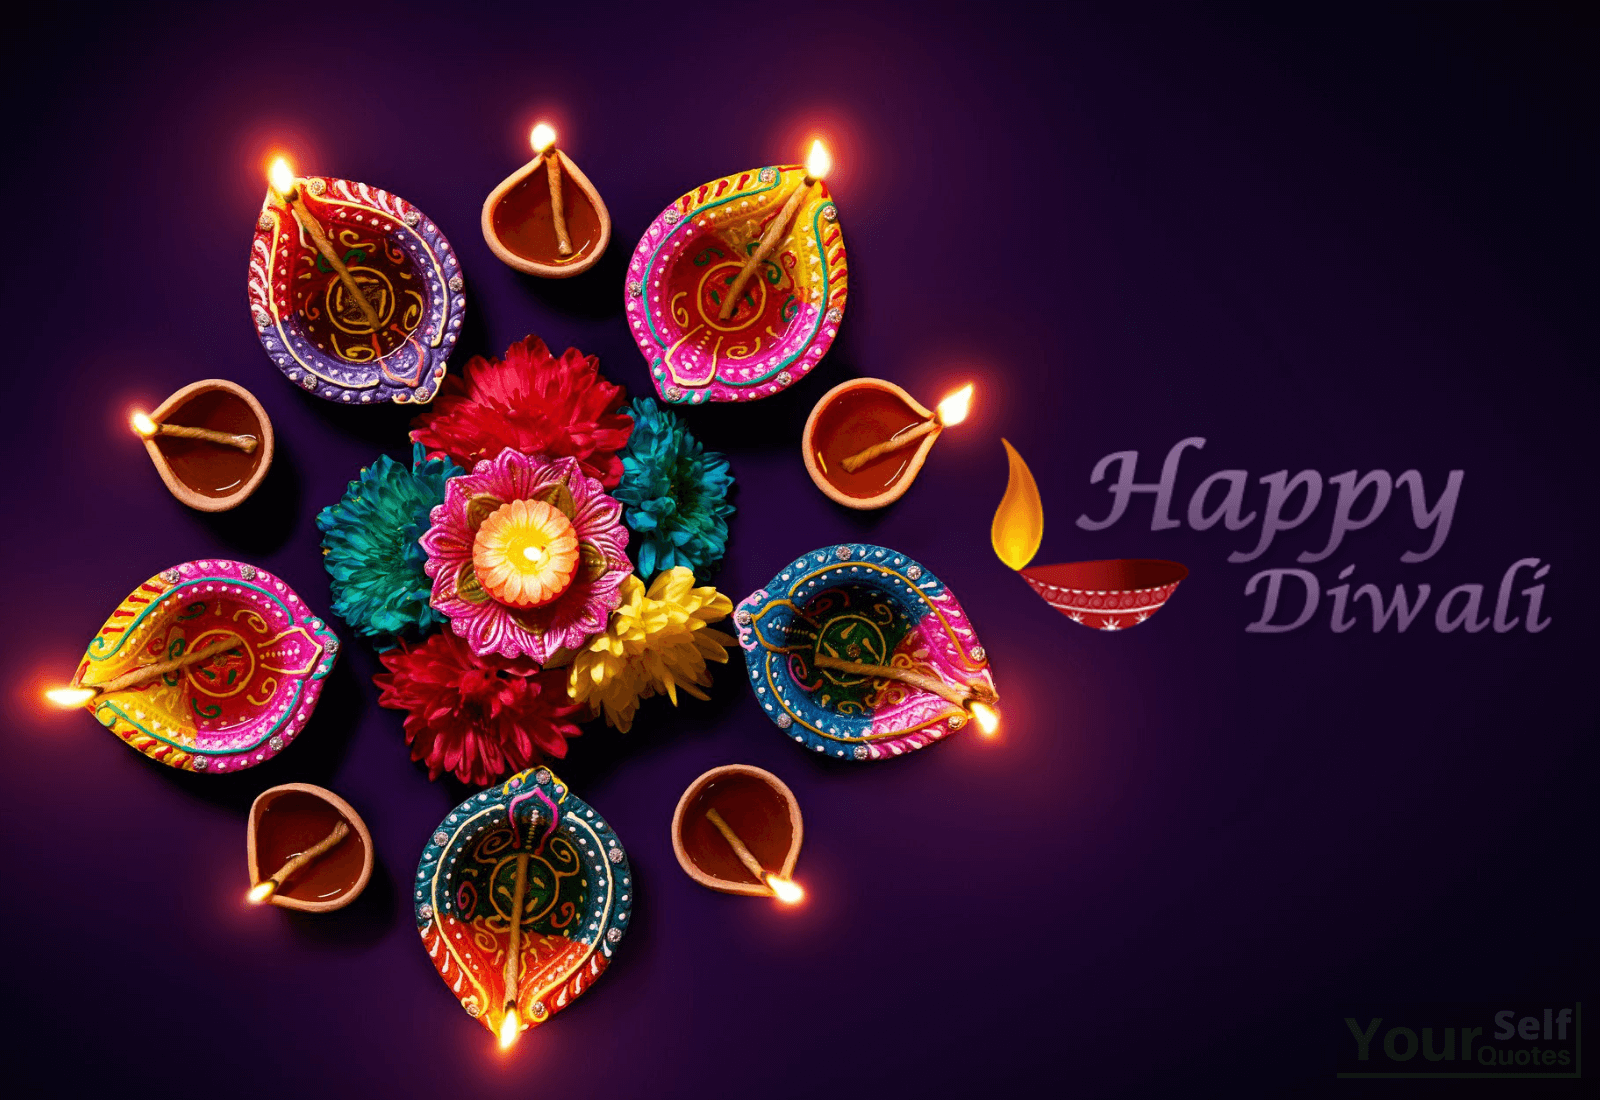 Happy Diwali Images, Photos, Pictures, Wallpapers For WhatsApp & Facebook